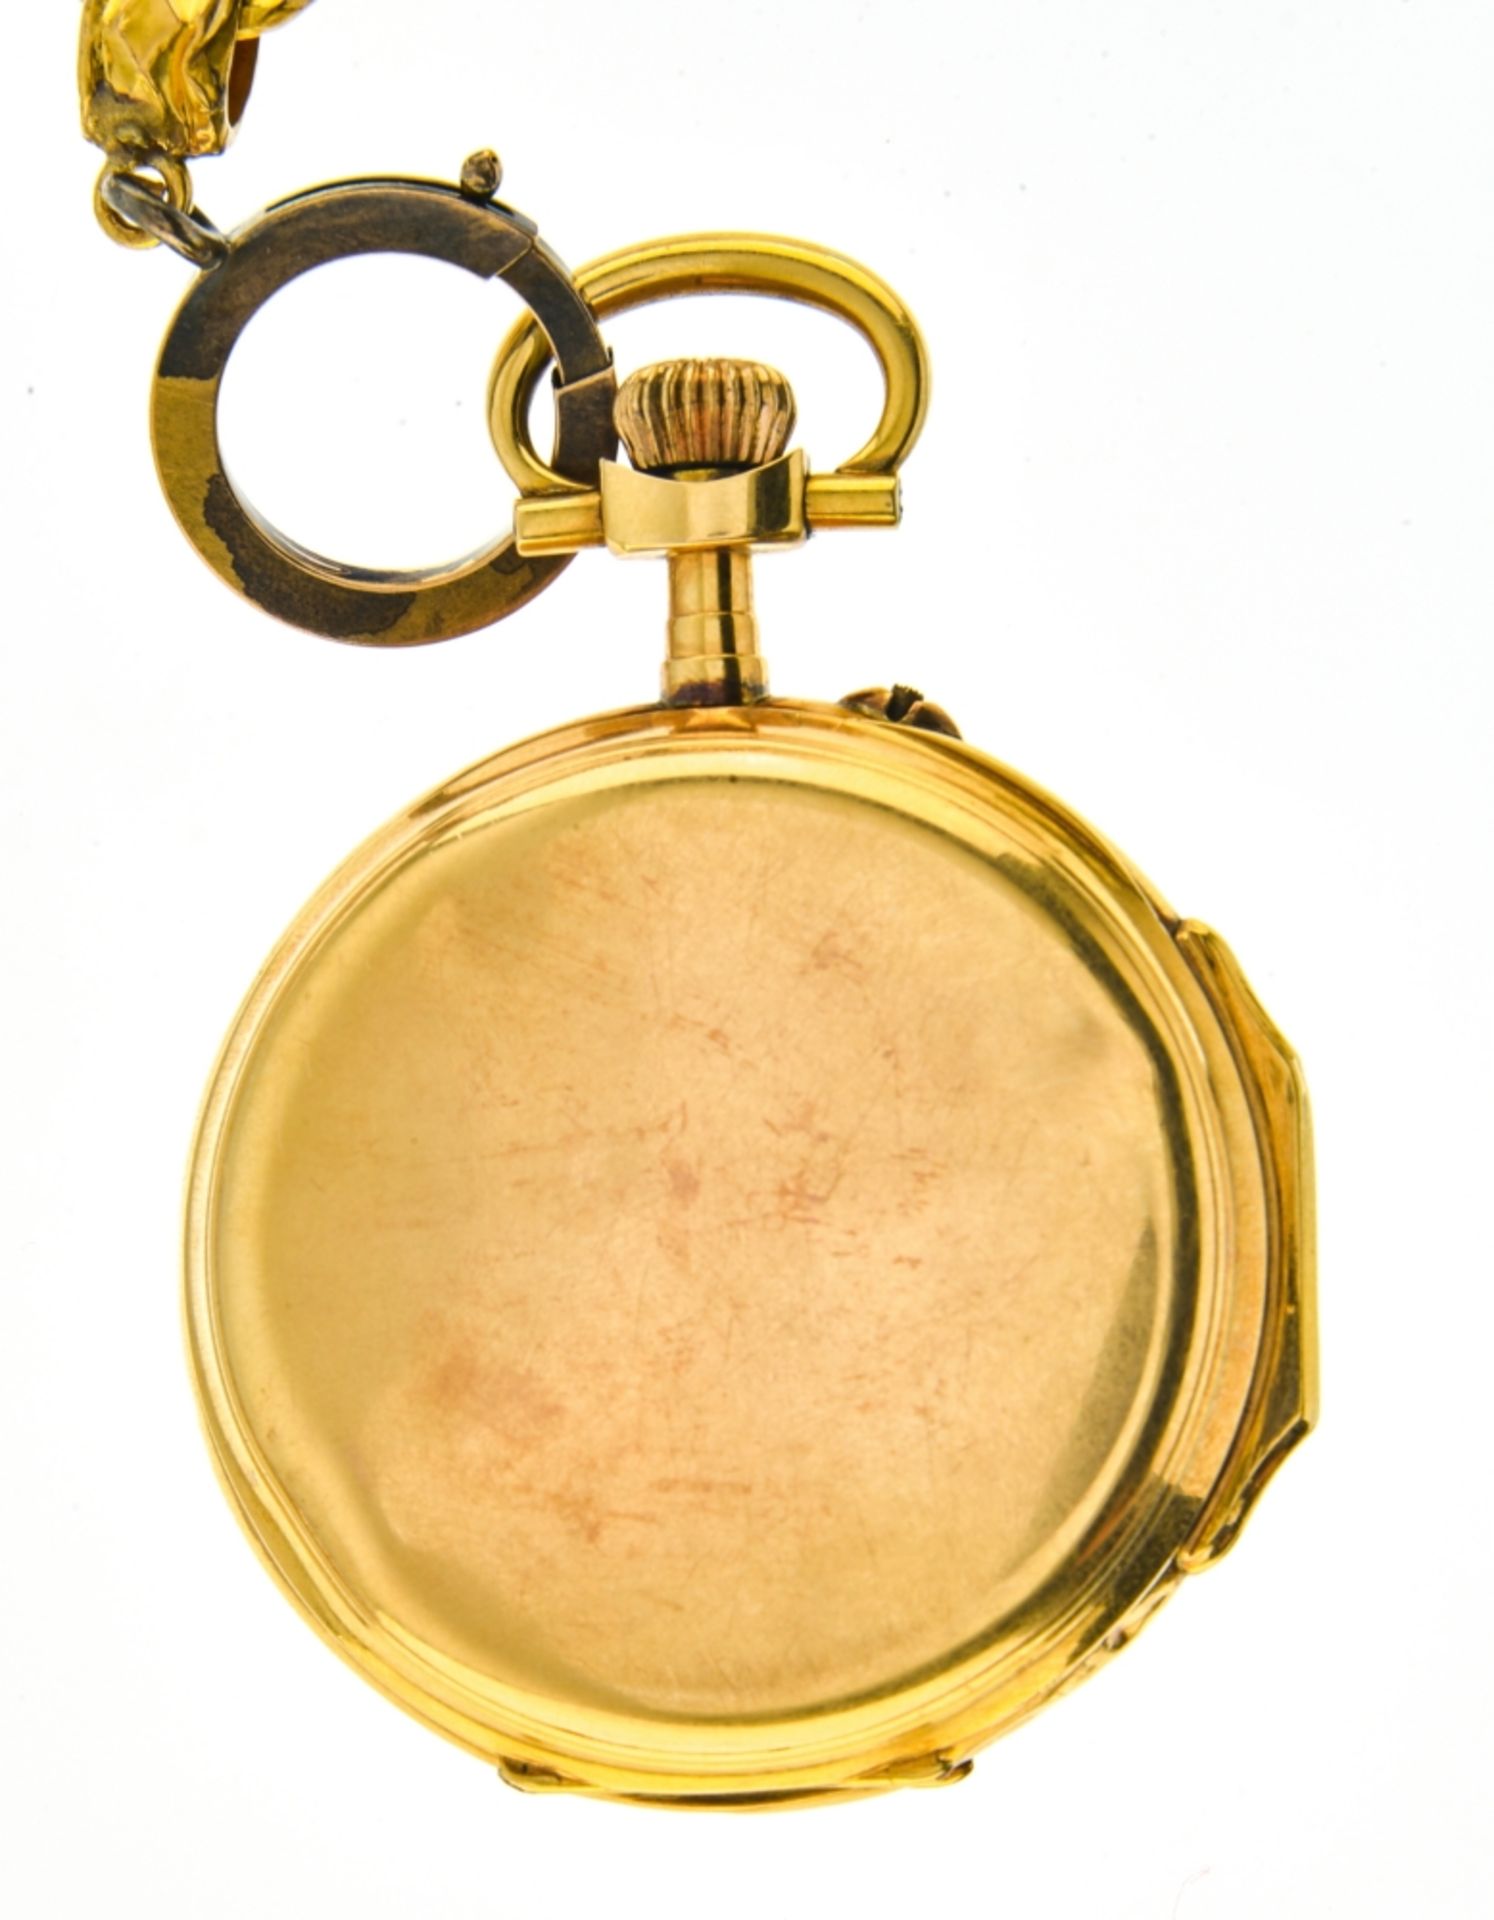 Breguet spiral fob watch and chain 18 kt gold pocket watch. Porcelain dial with Roman numerals and - Bild 2 aus 5